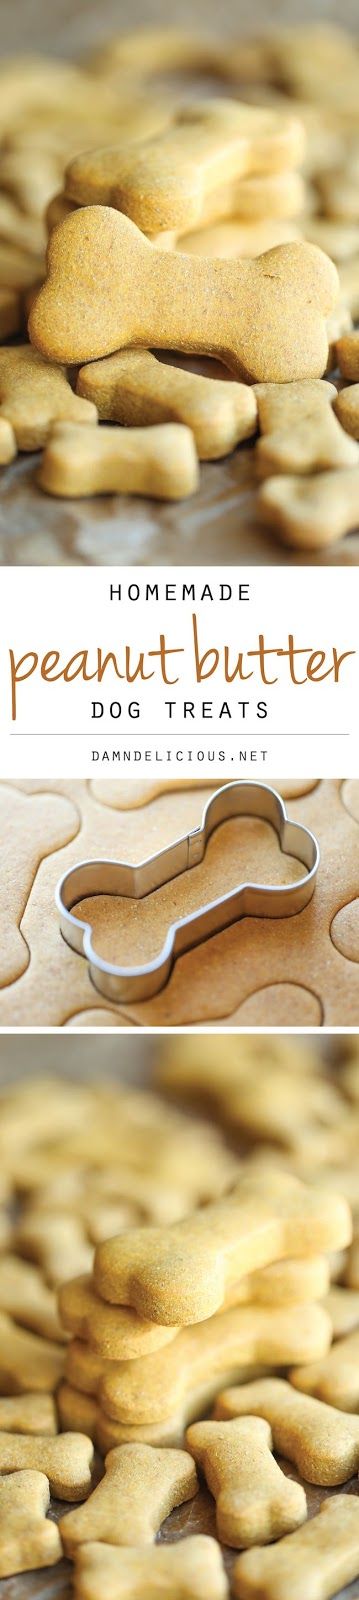 Homemade Peanut Butter Dog Treats That You Need To Try Now | DIY Beauty Fashion